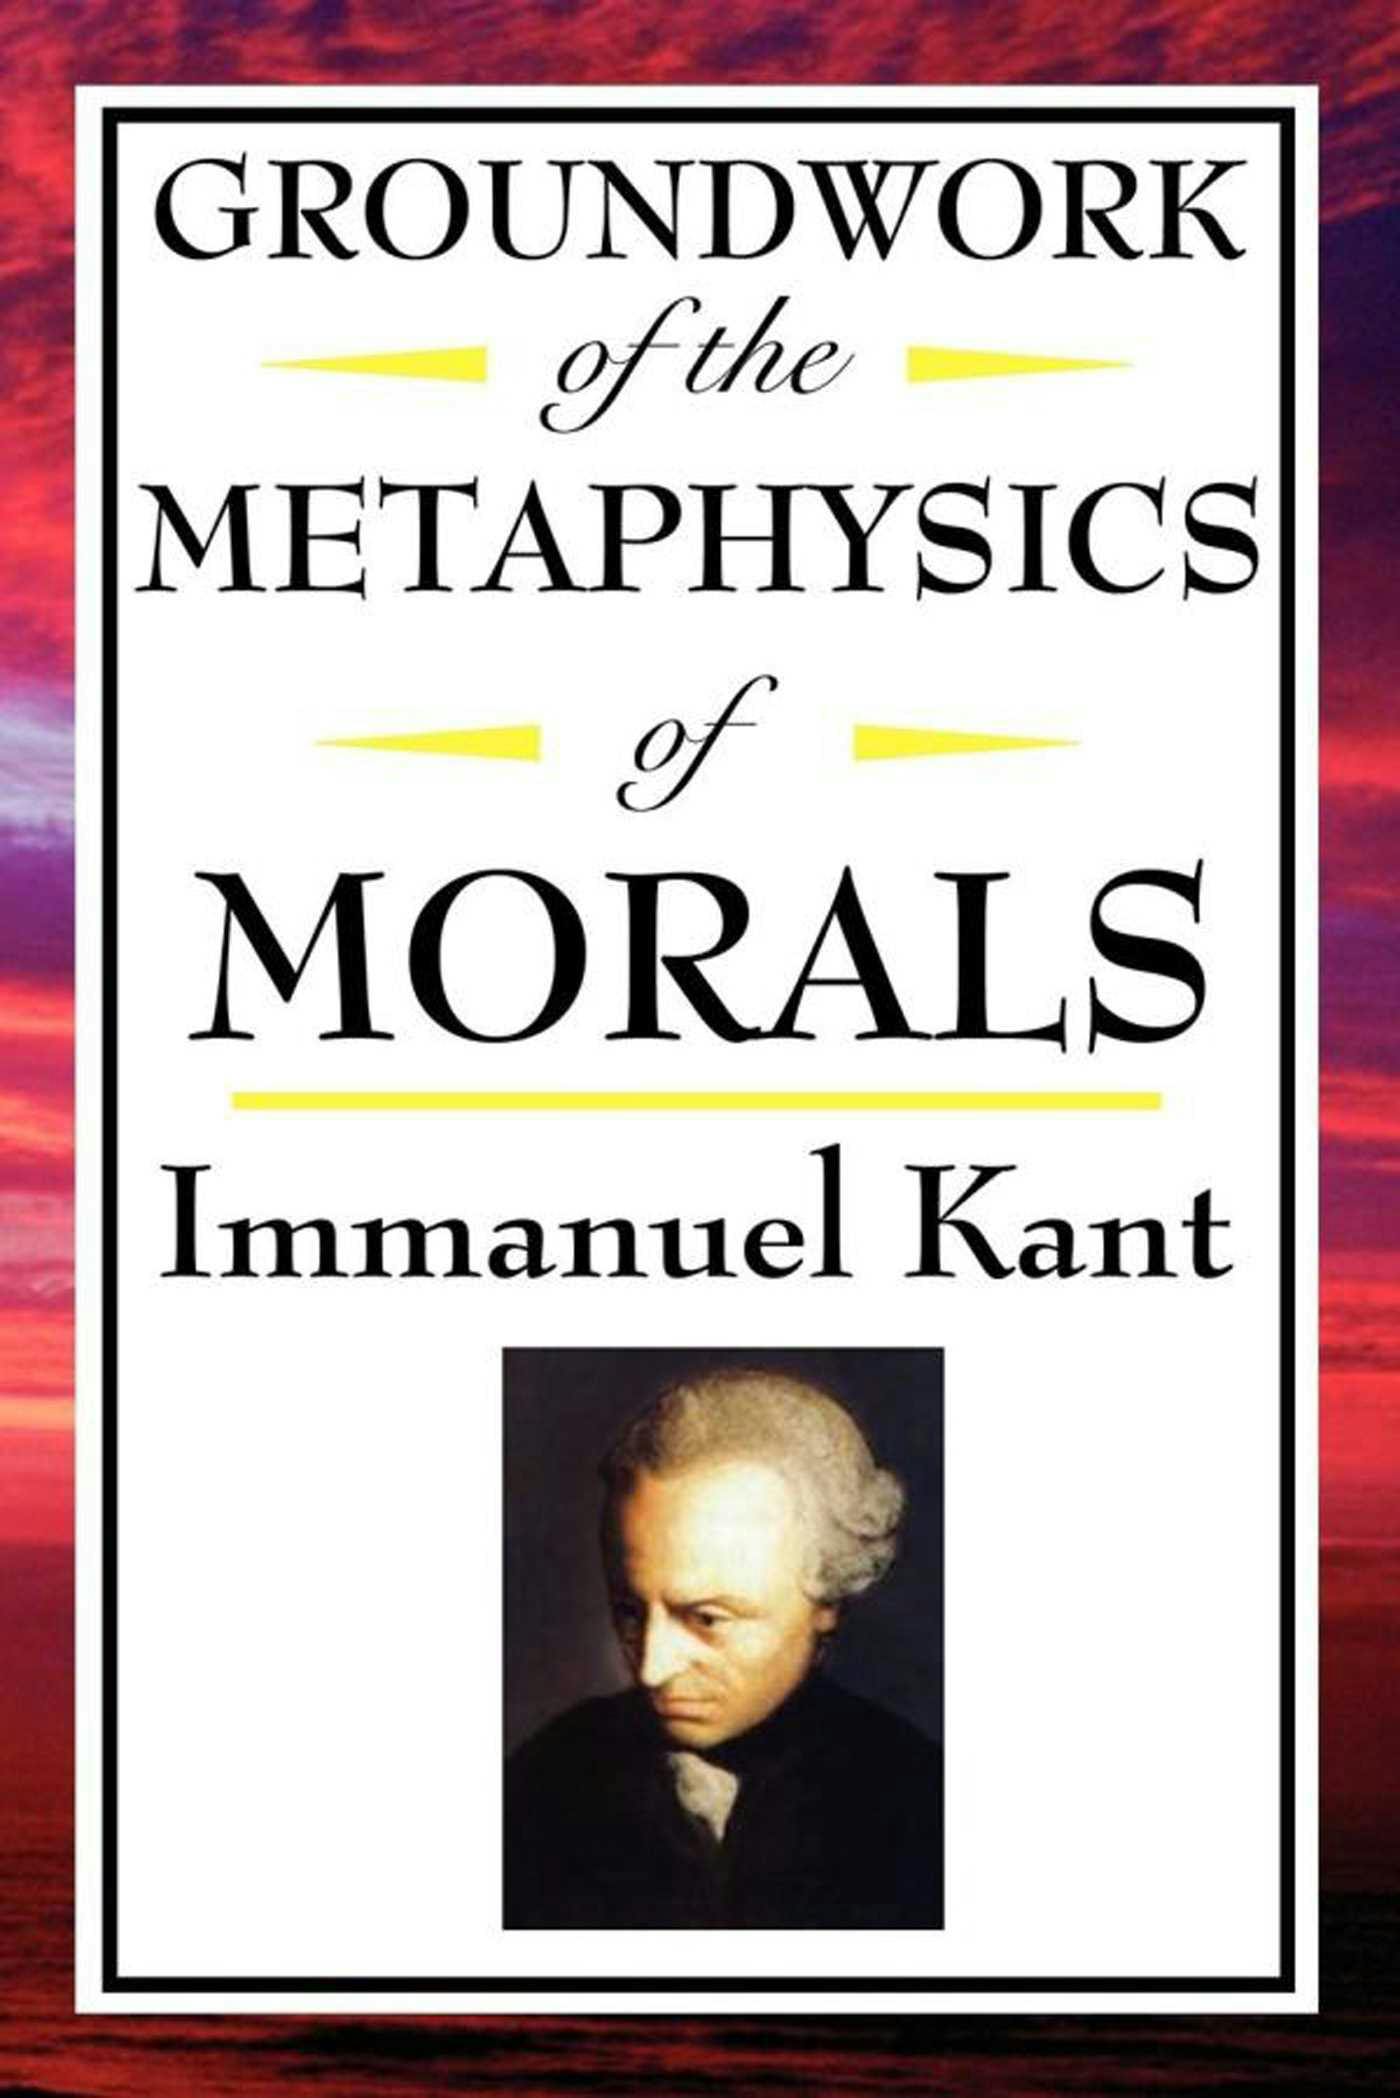 Groundwork of the Metaphysics of Morals - Immanual Kant